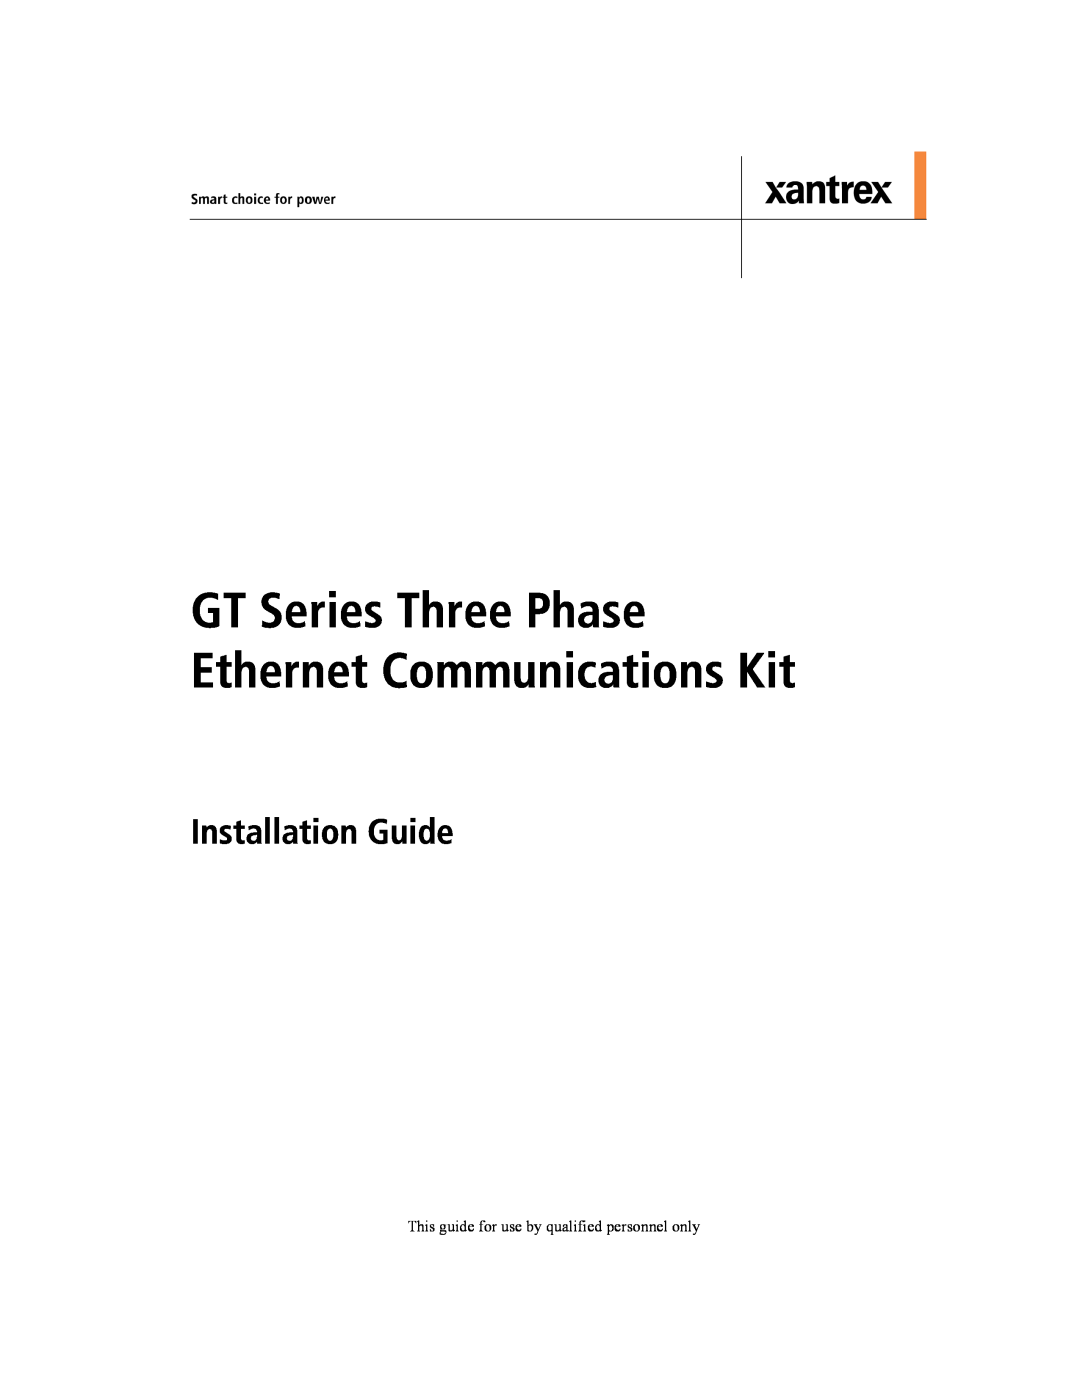 Xantrex Technology manual GT Series Three Phase Ethernet Communications Kit, Installation Guide 